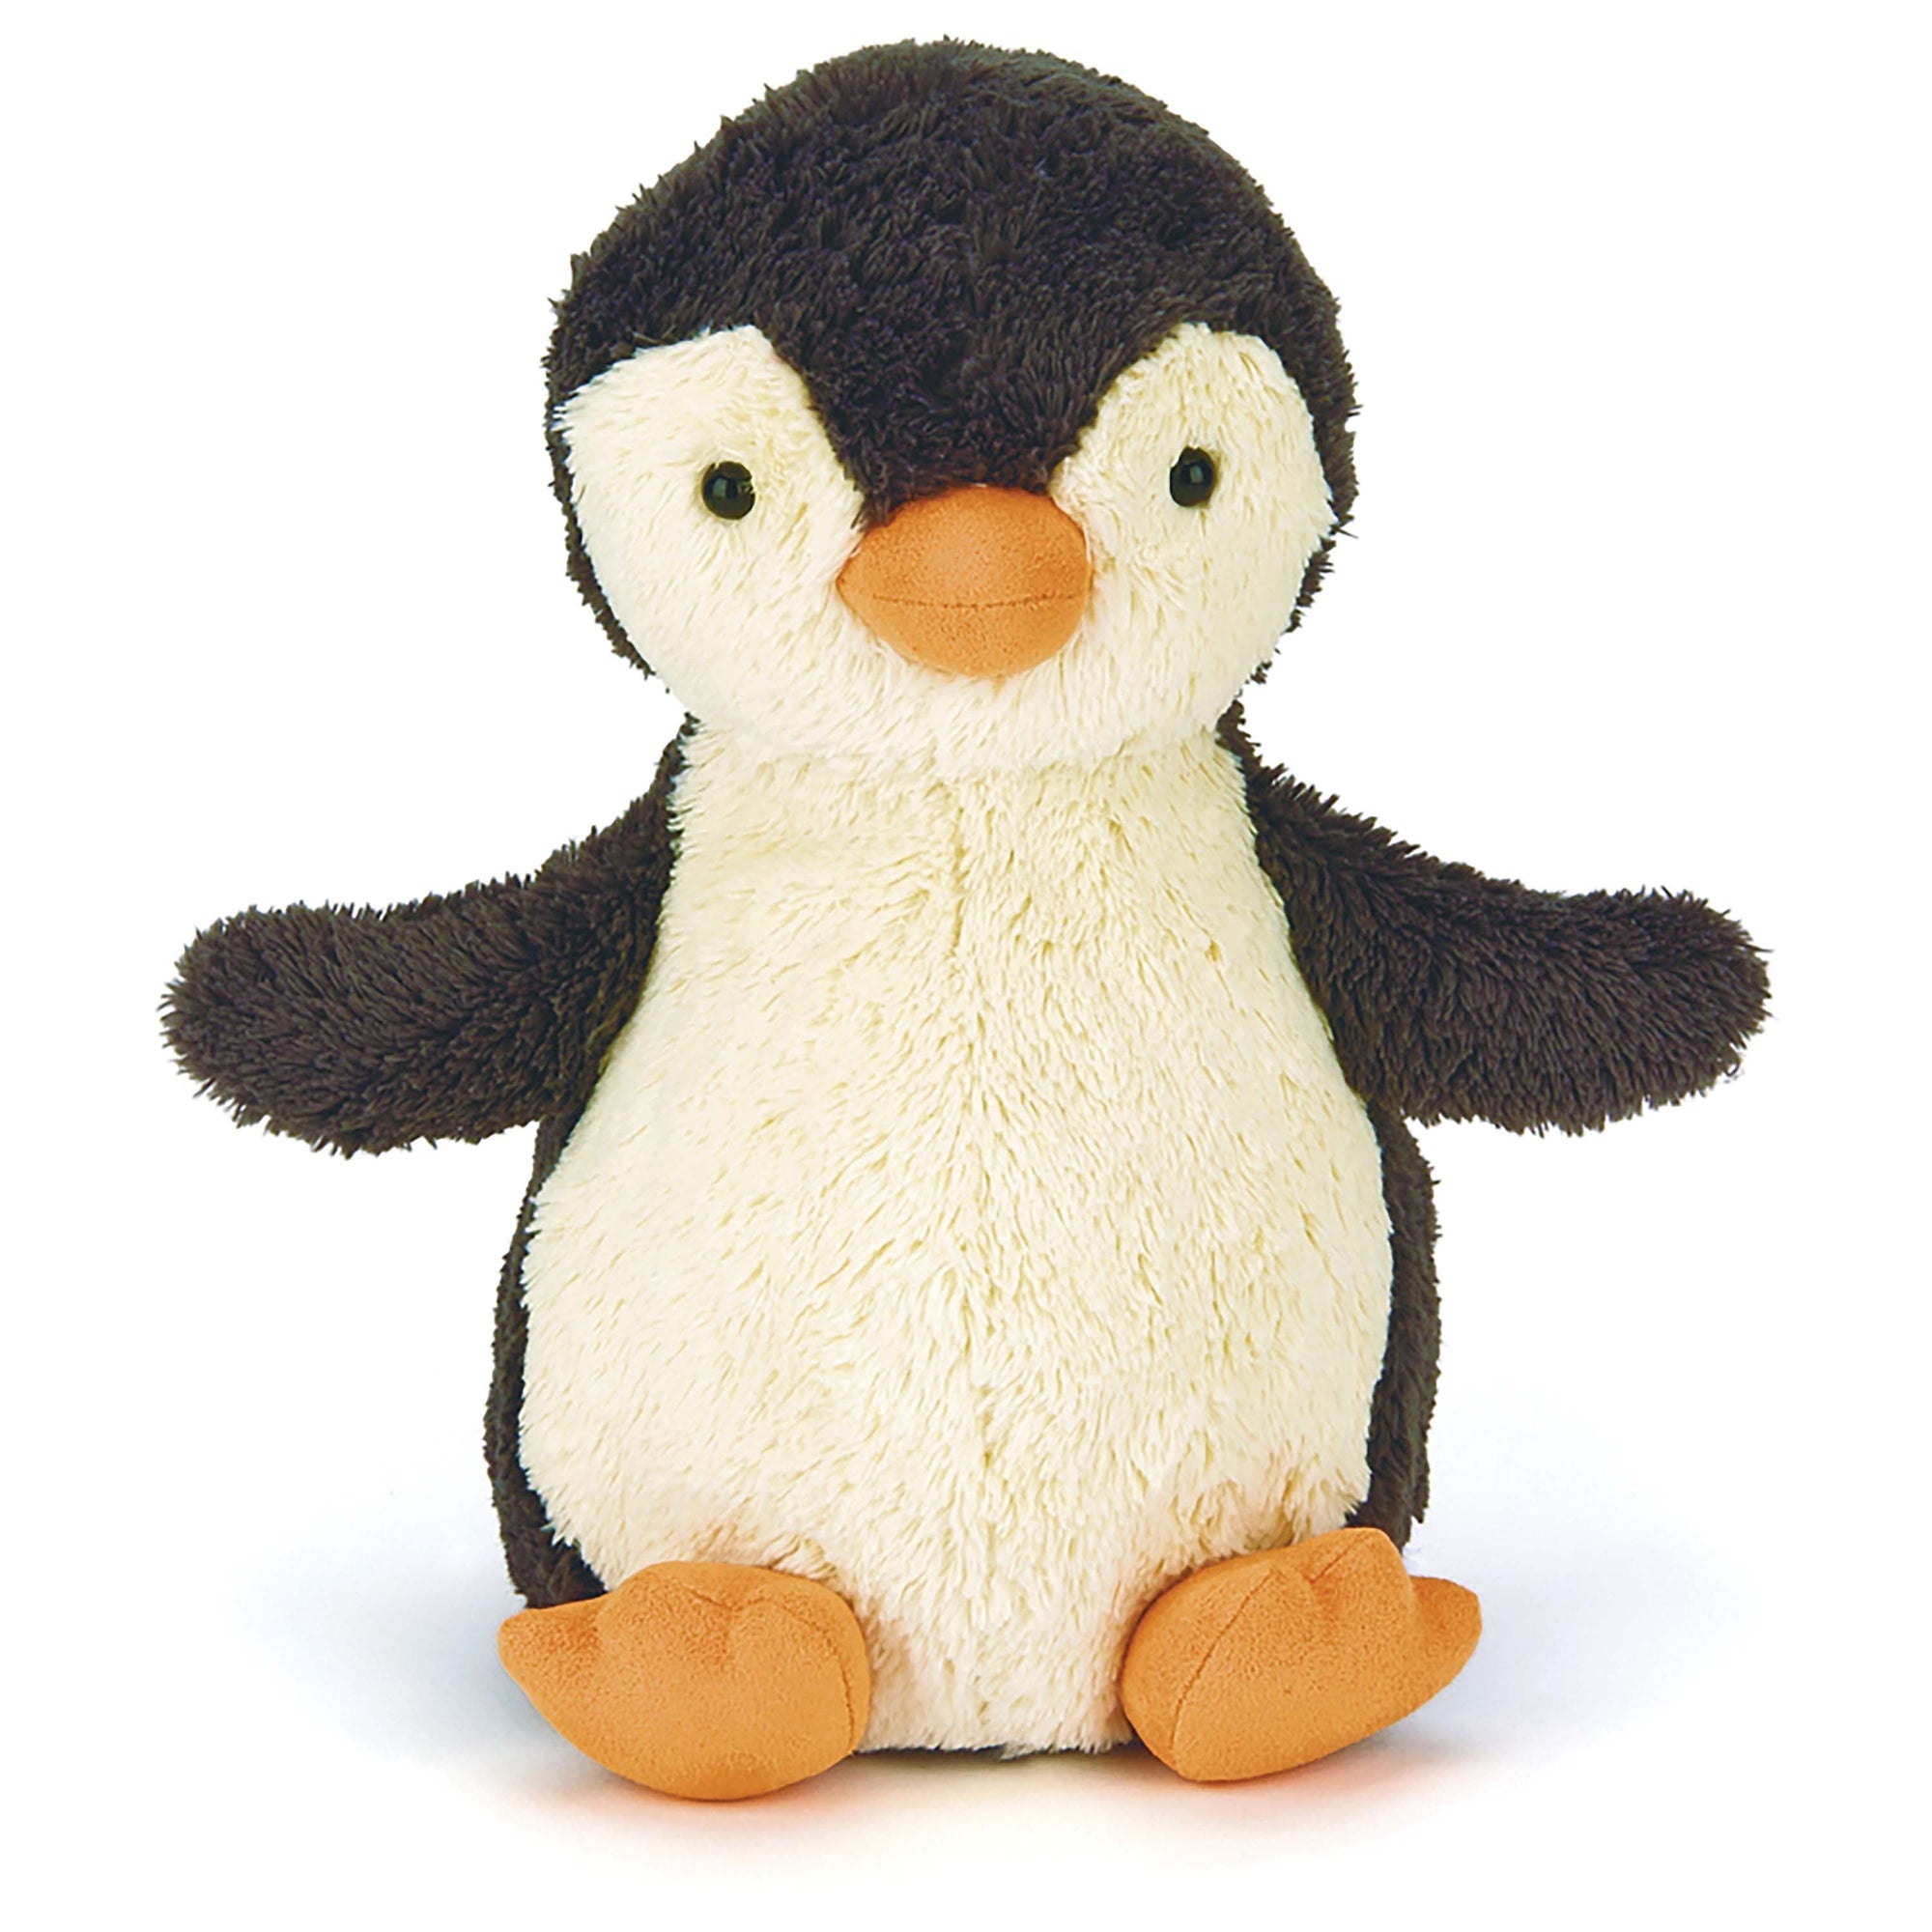 jellycat penguin - angus and dudley